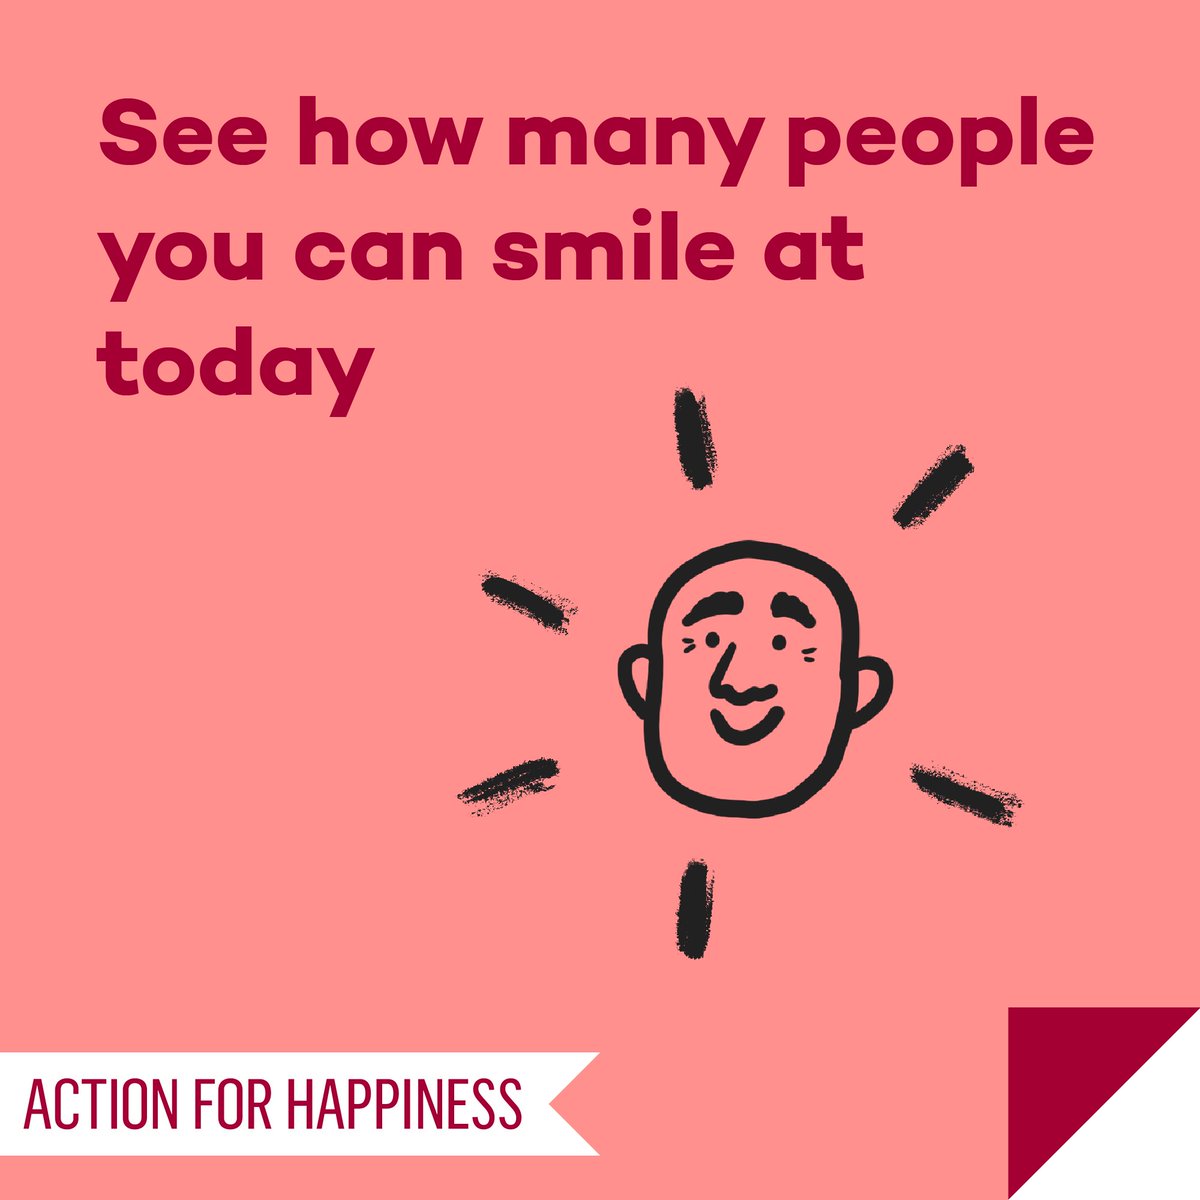 Happier January - Day 30: See how many people you can smile at today actionforhappiness.org/january #HappierJanuary